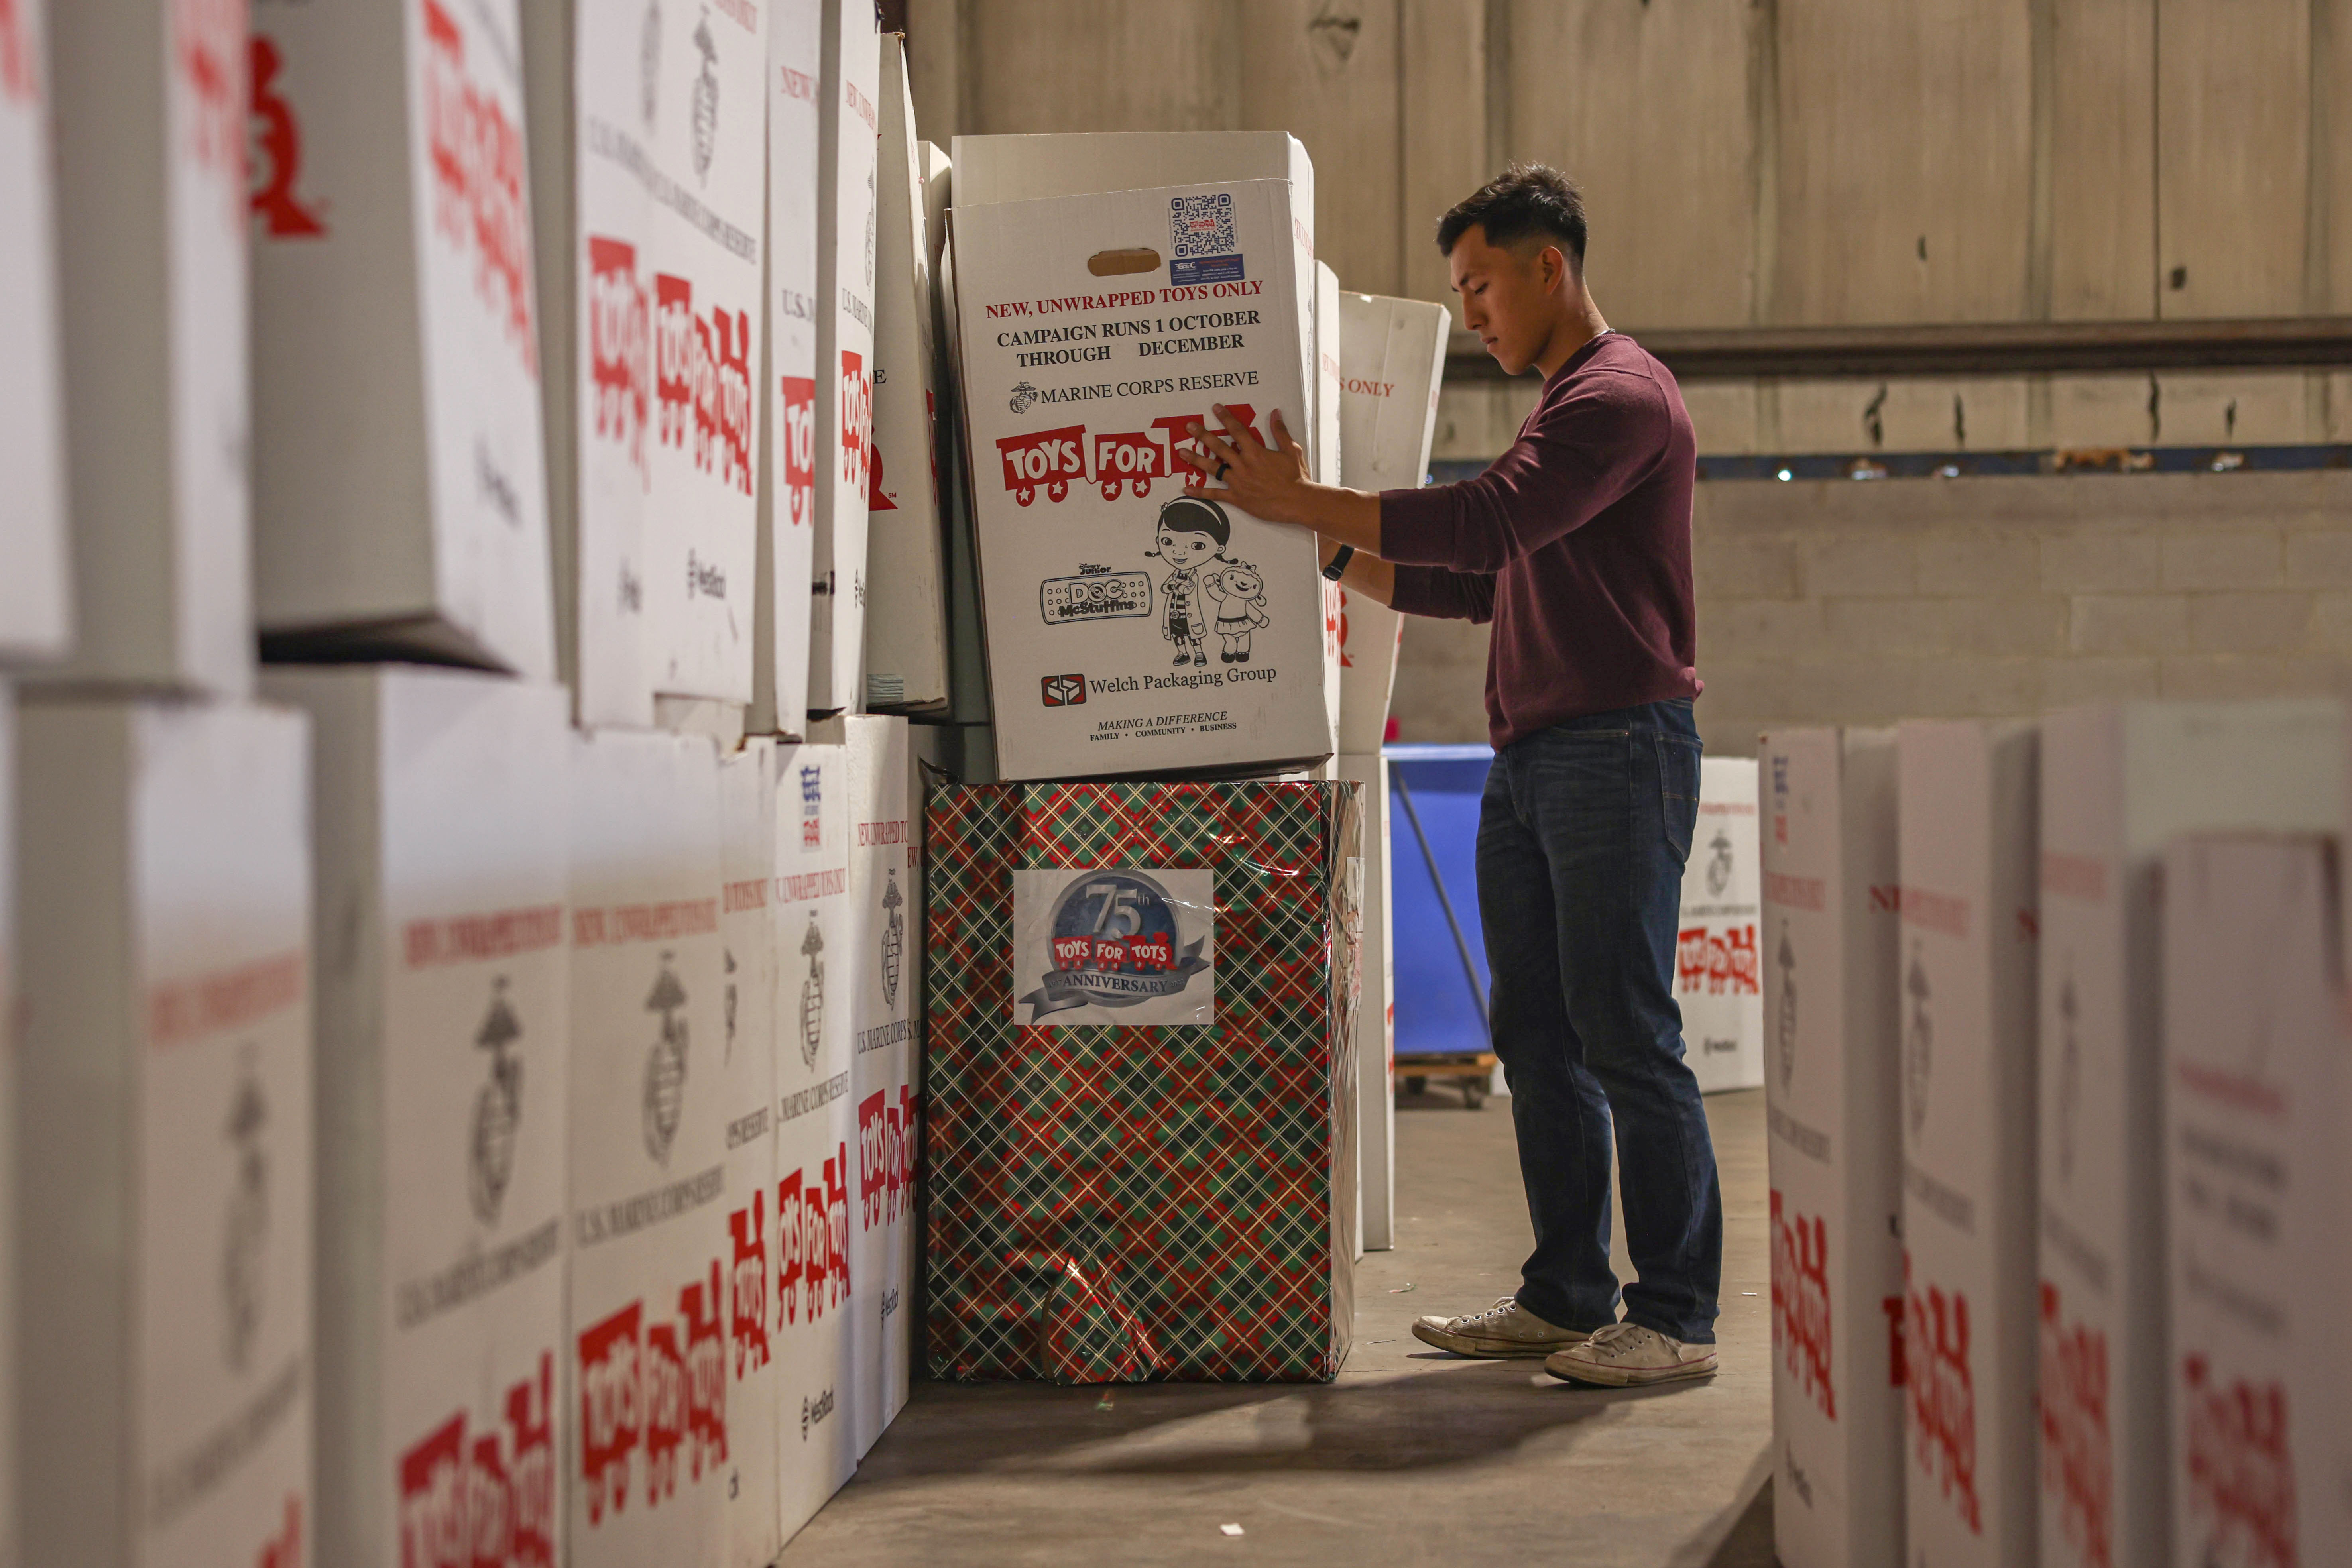 A Marine handles a large white box with “TOYS FOR TOTS” written on it in a warehouse-type space filled with similar boxes.